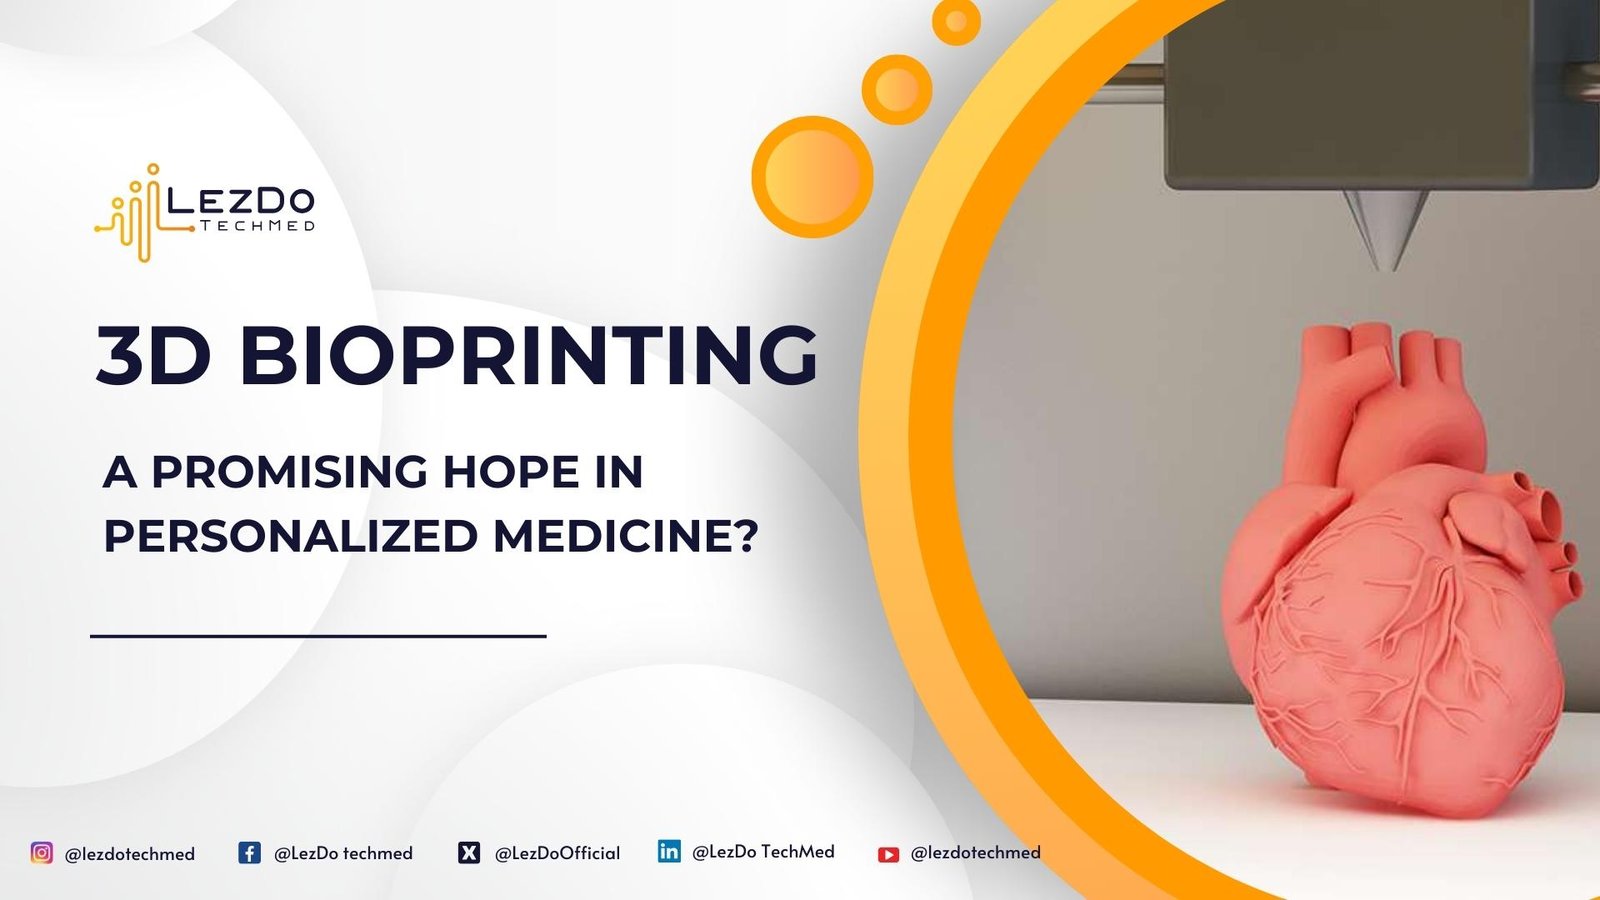 3D Bioprinting: A Promising Hope in Personalized Medicine?